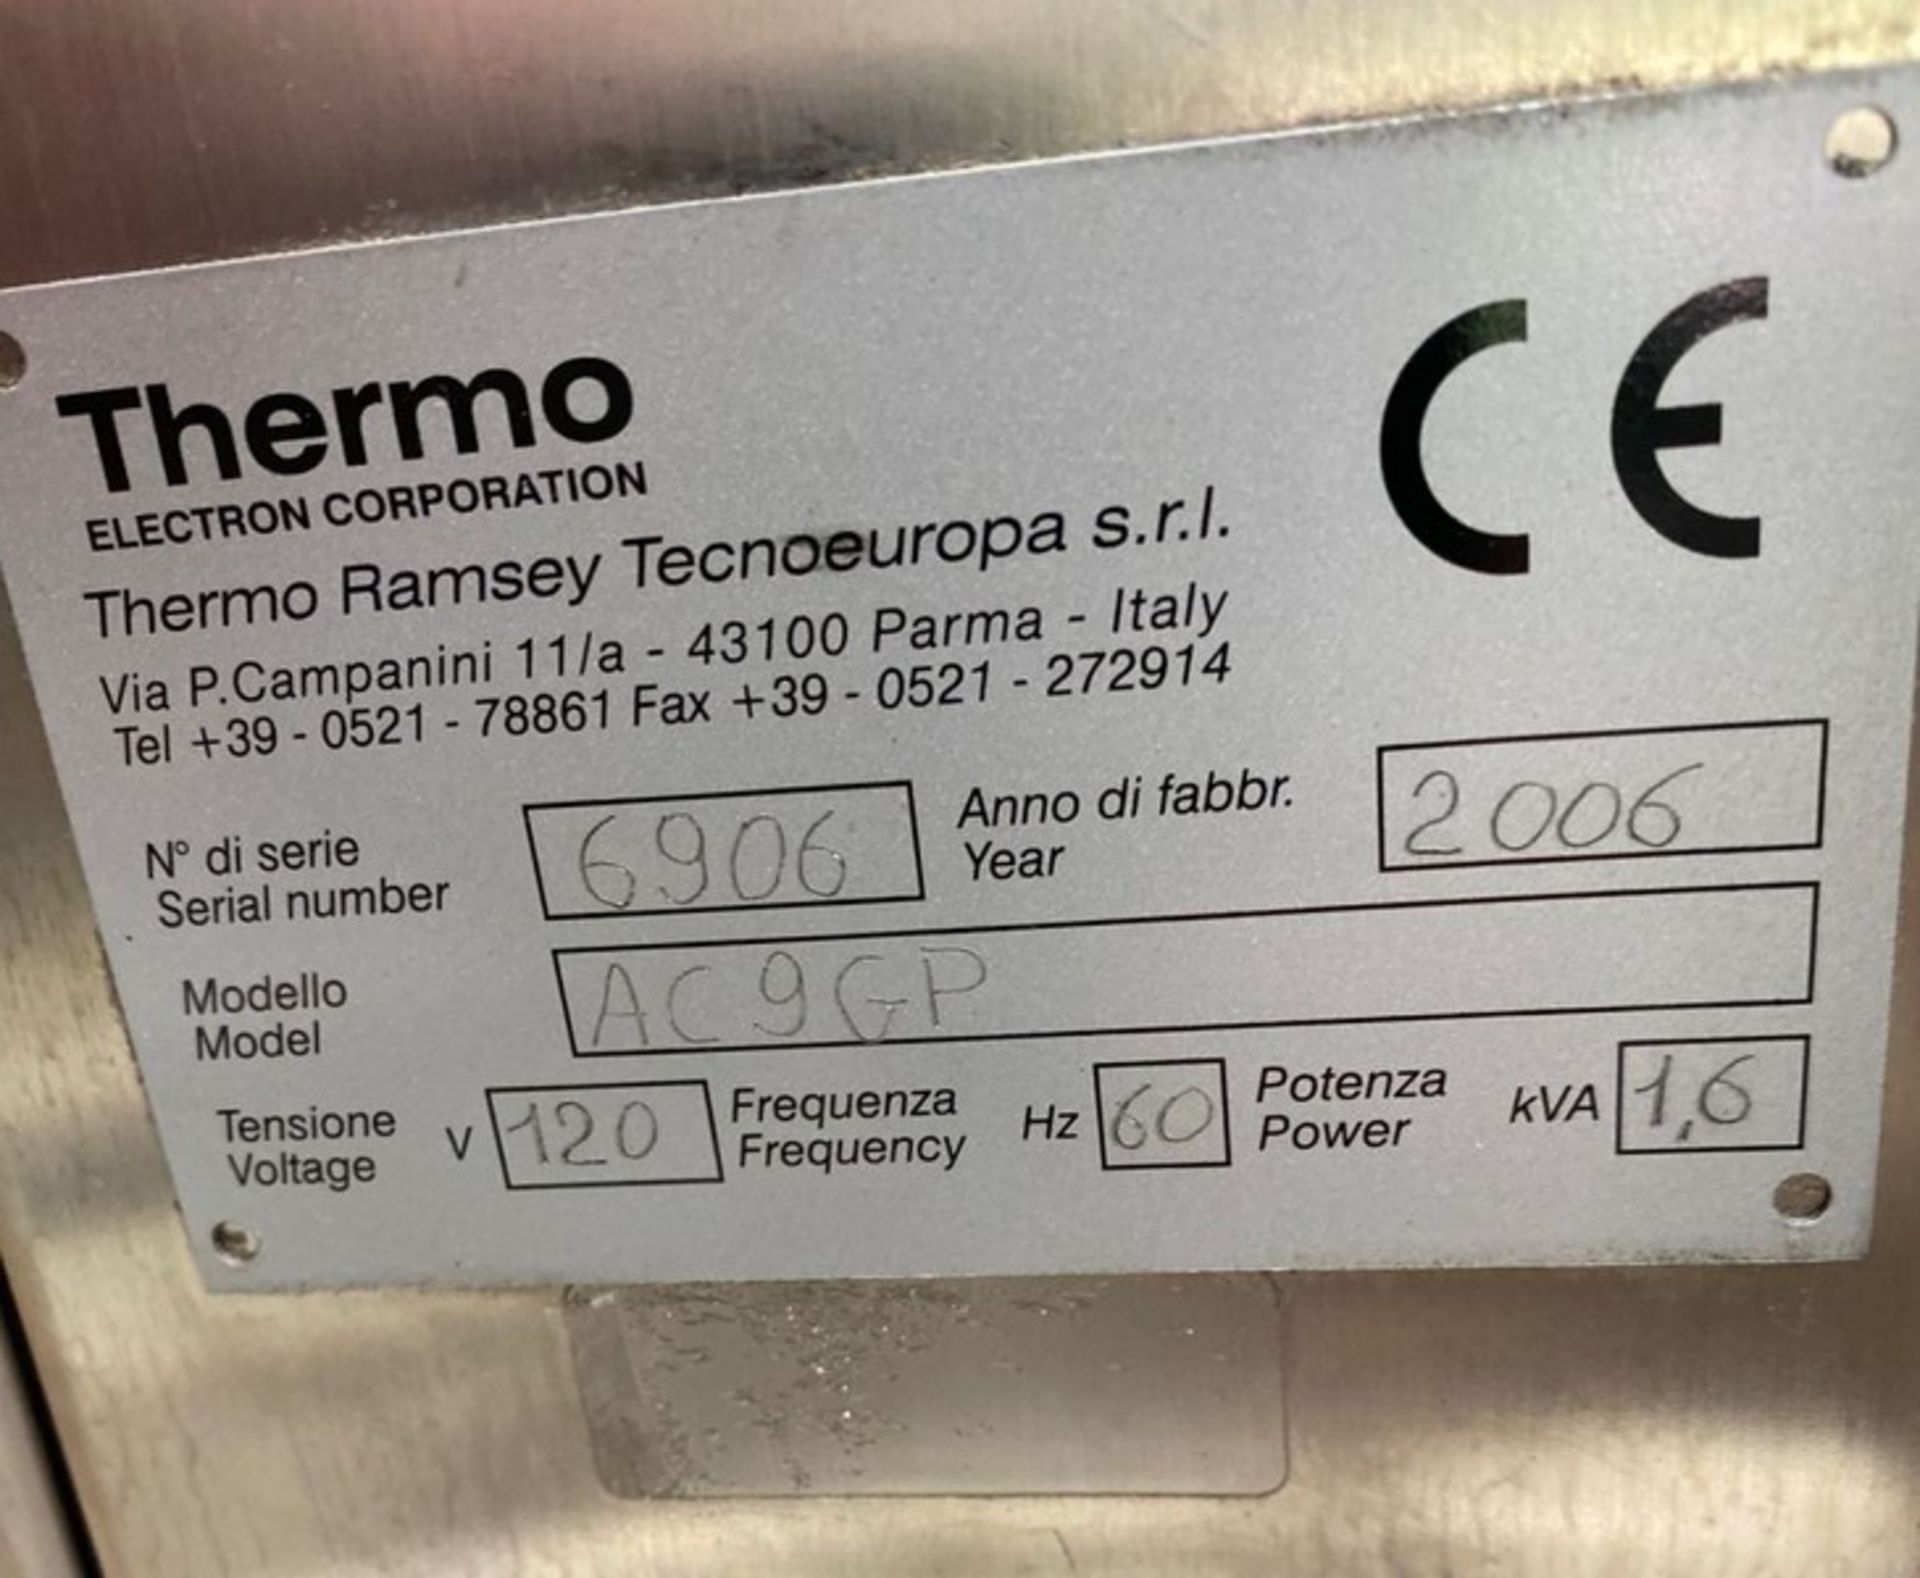 Thermo Electron Checkweigher, Thermo Electron AC9GP Thermo Ramsey Versaweigh checkweigher with - Image 3 of 13